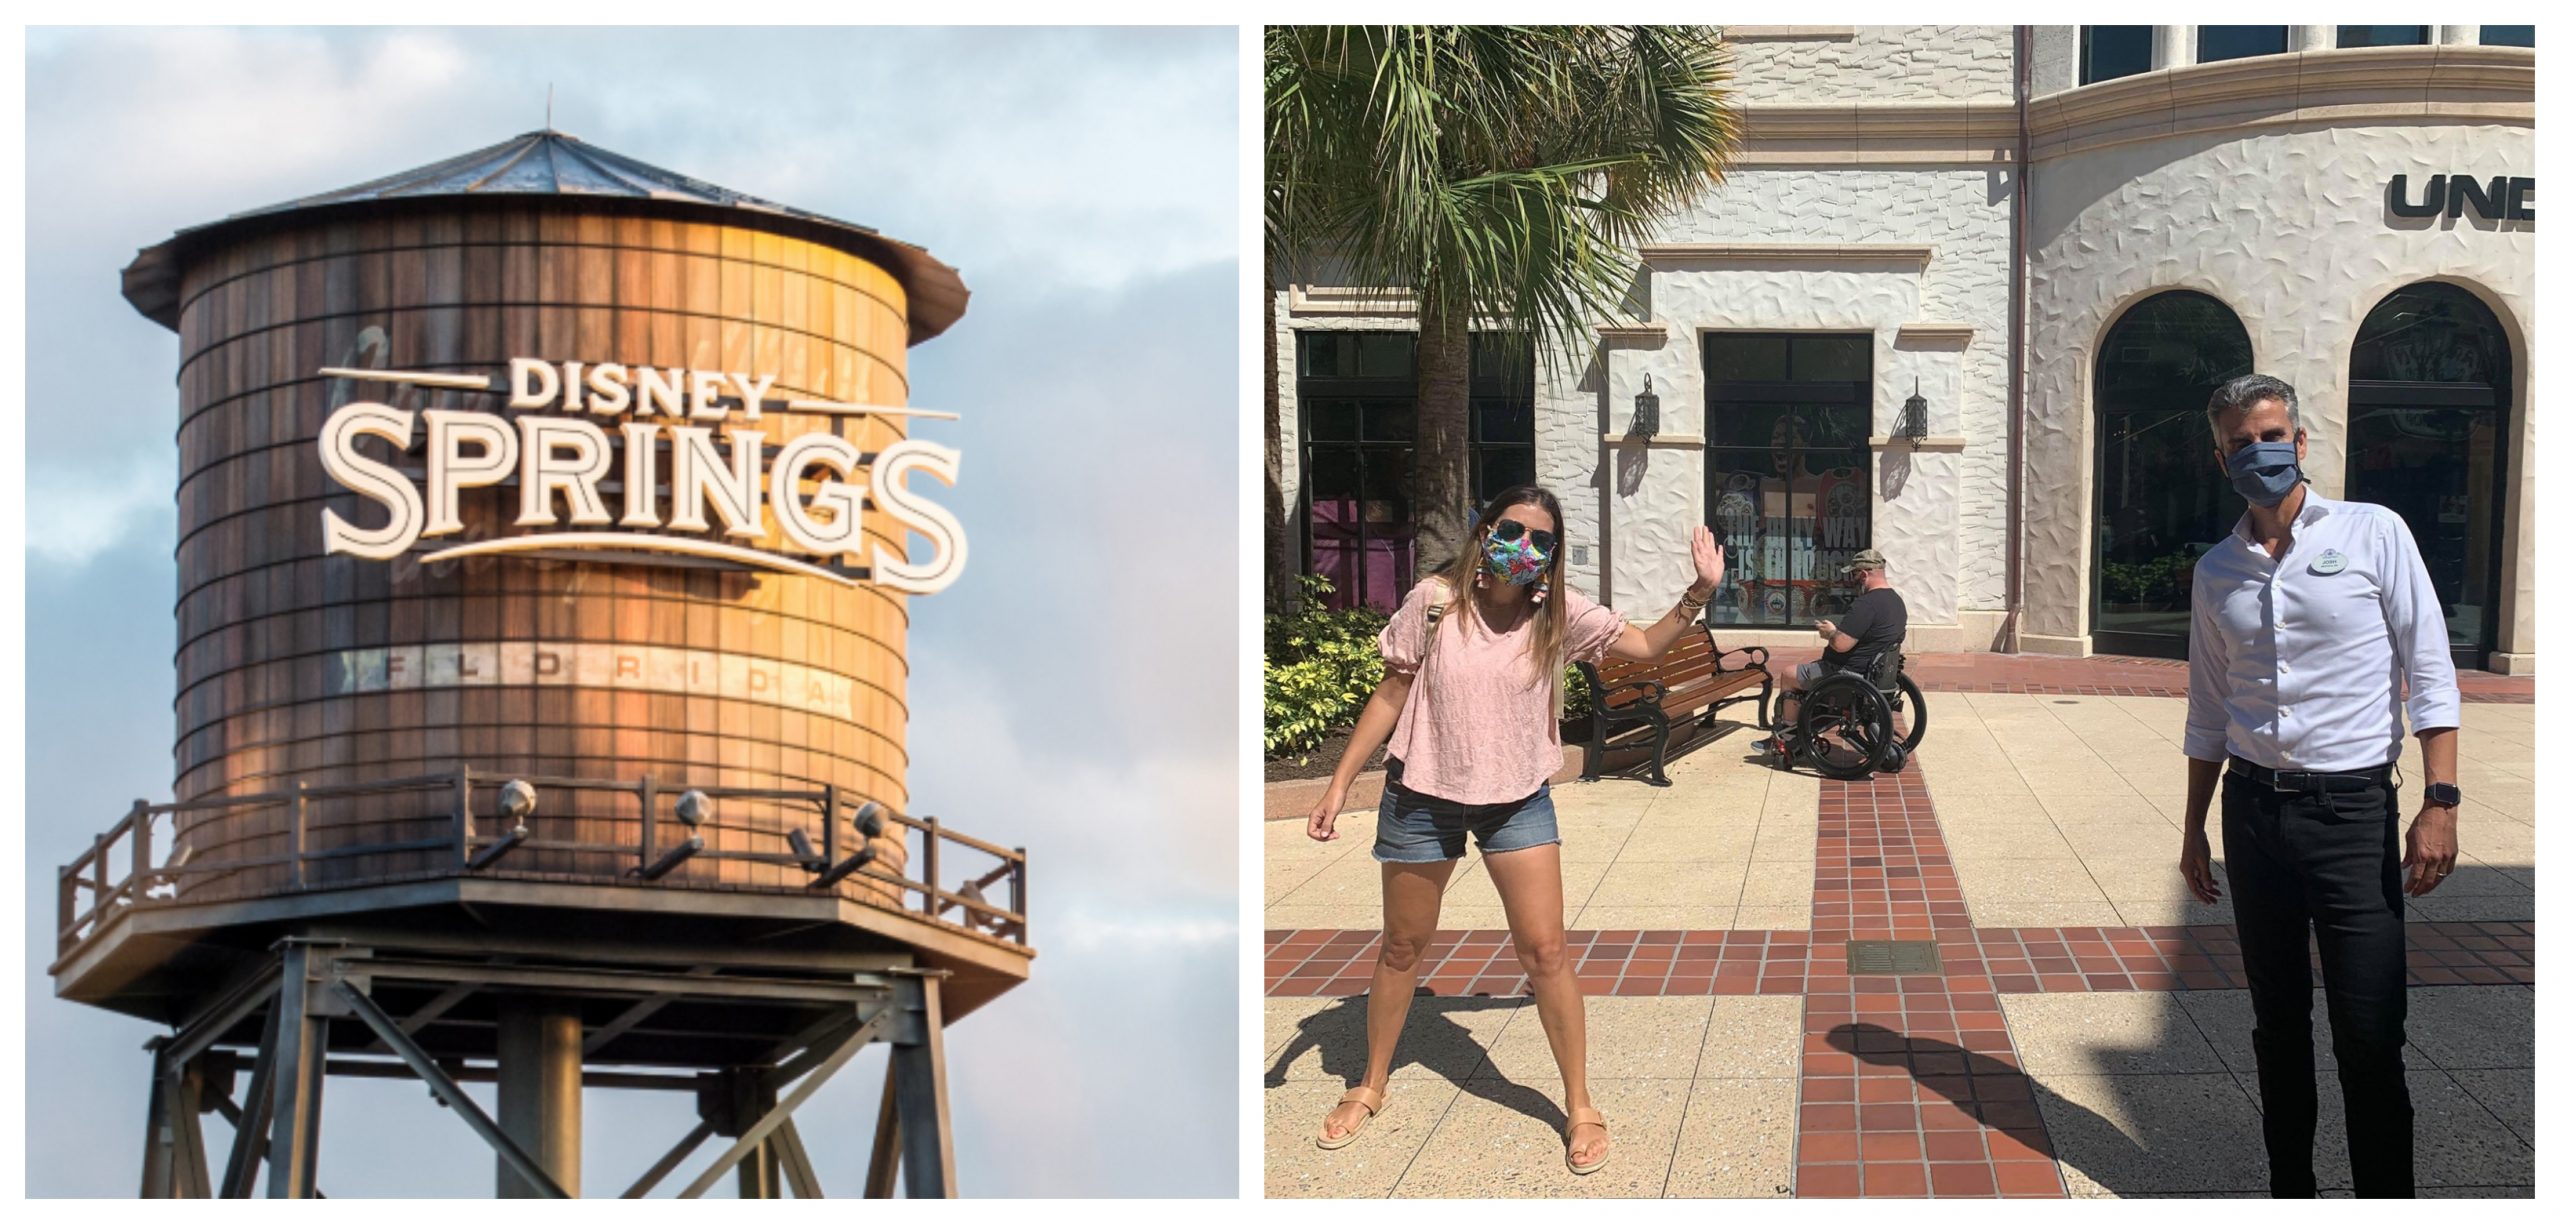 Live Videos of the Reopening of Disney Springs